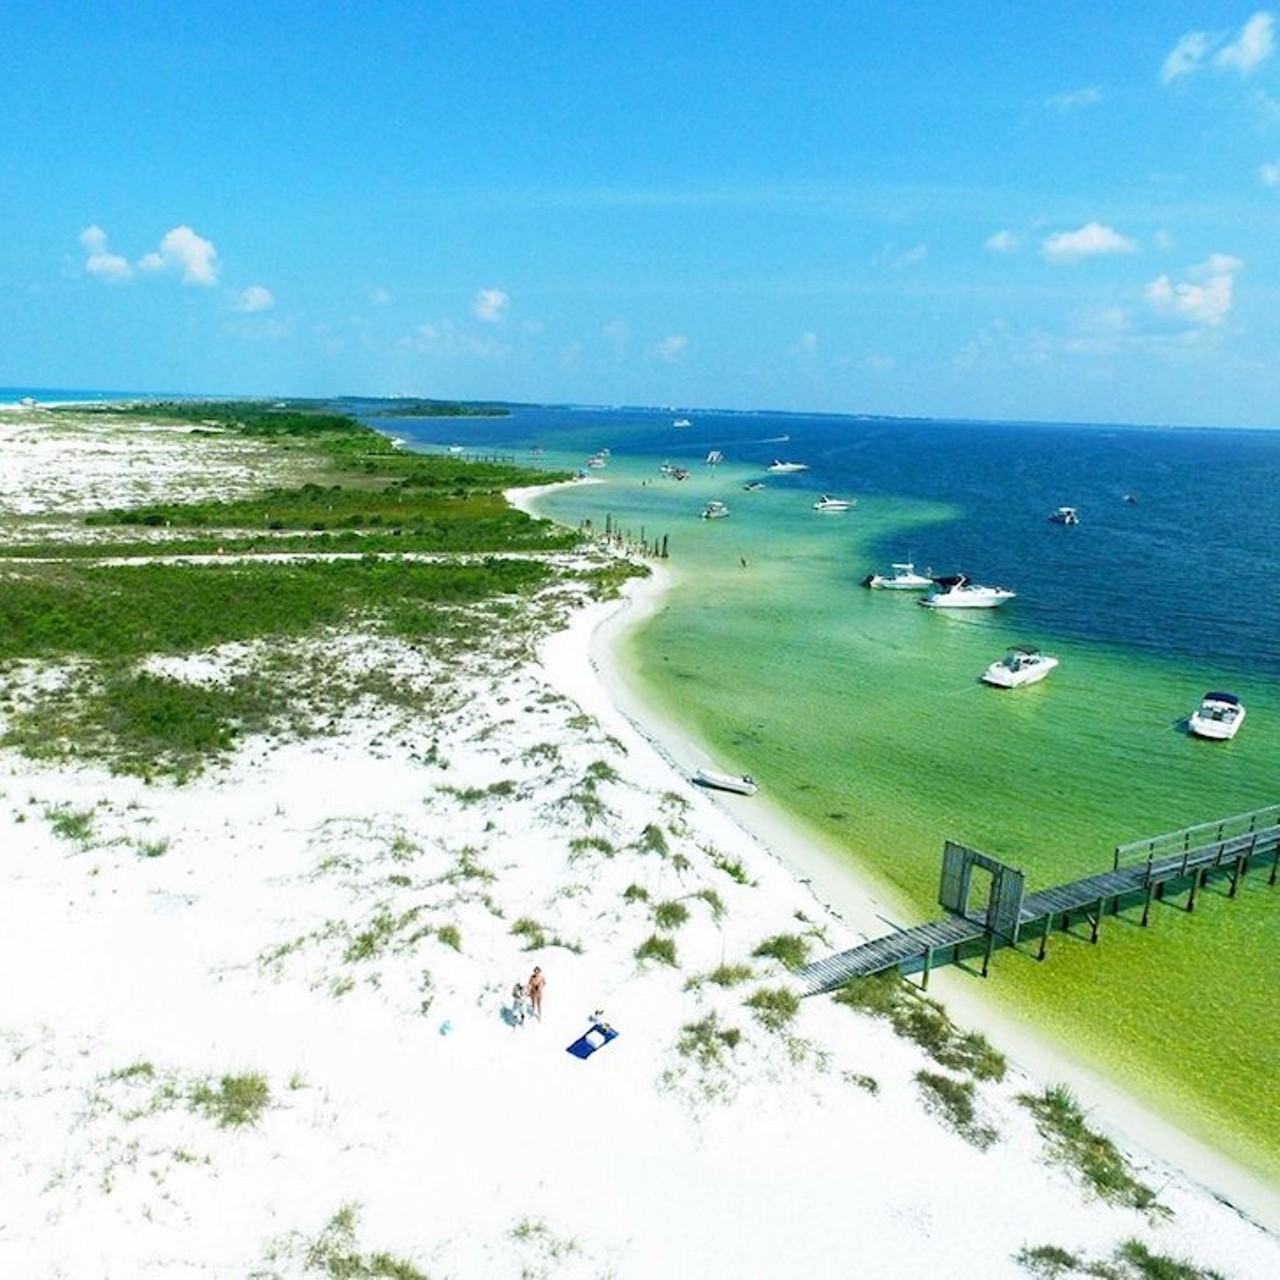 St. Andrews State Park
4607 State Park Lane, Panama City Beach, FL 32408 | 850-233-5140 x5141
Many centuries ago, Native Americans visited these beaches to catch the shellfish which then abounded along the shore. Now, campers can visit the same seaside locales and stay overnight to gaze up at the same stars. 
Photo via St. Andrews State Park/Facebook